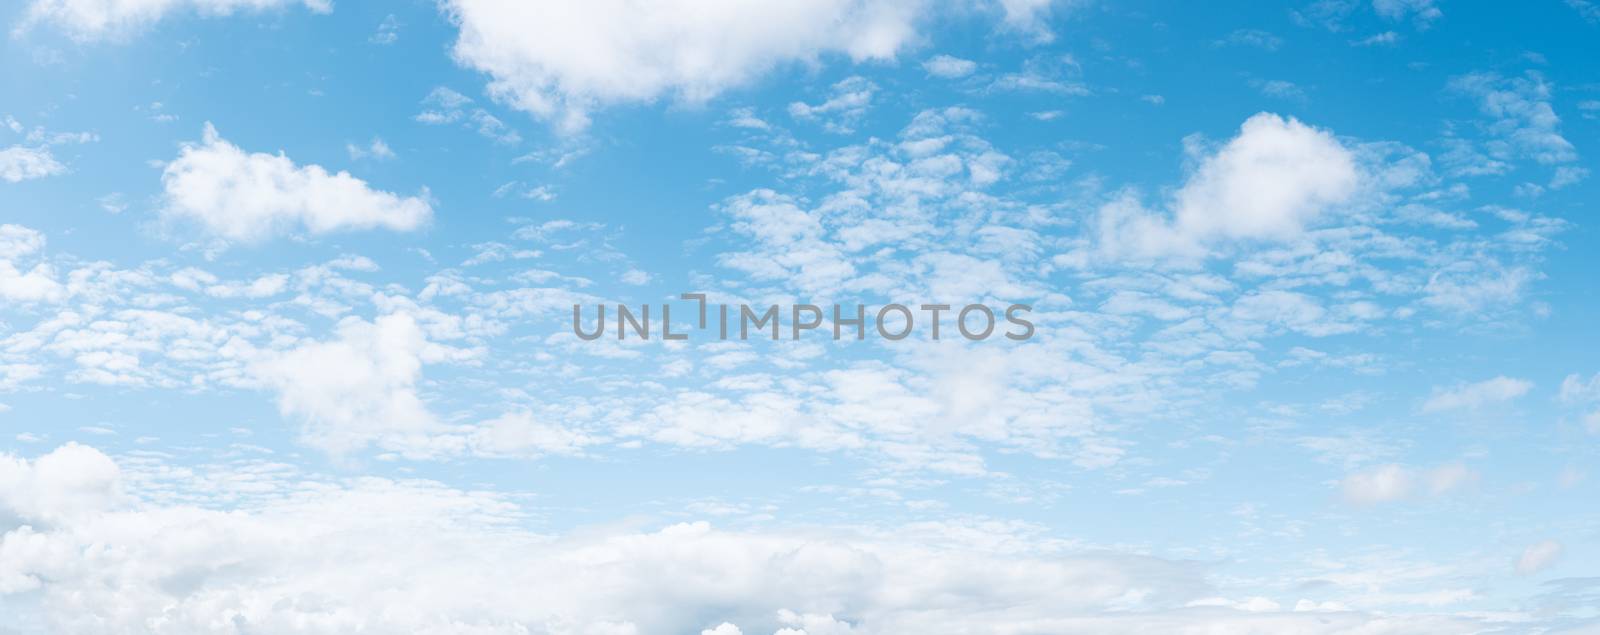 Panoramic blue sky background with white clouds by dutourdumonde